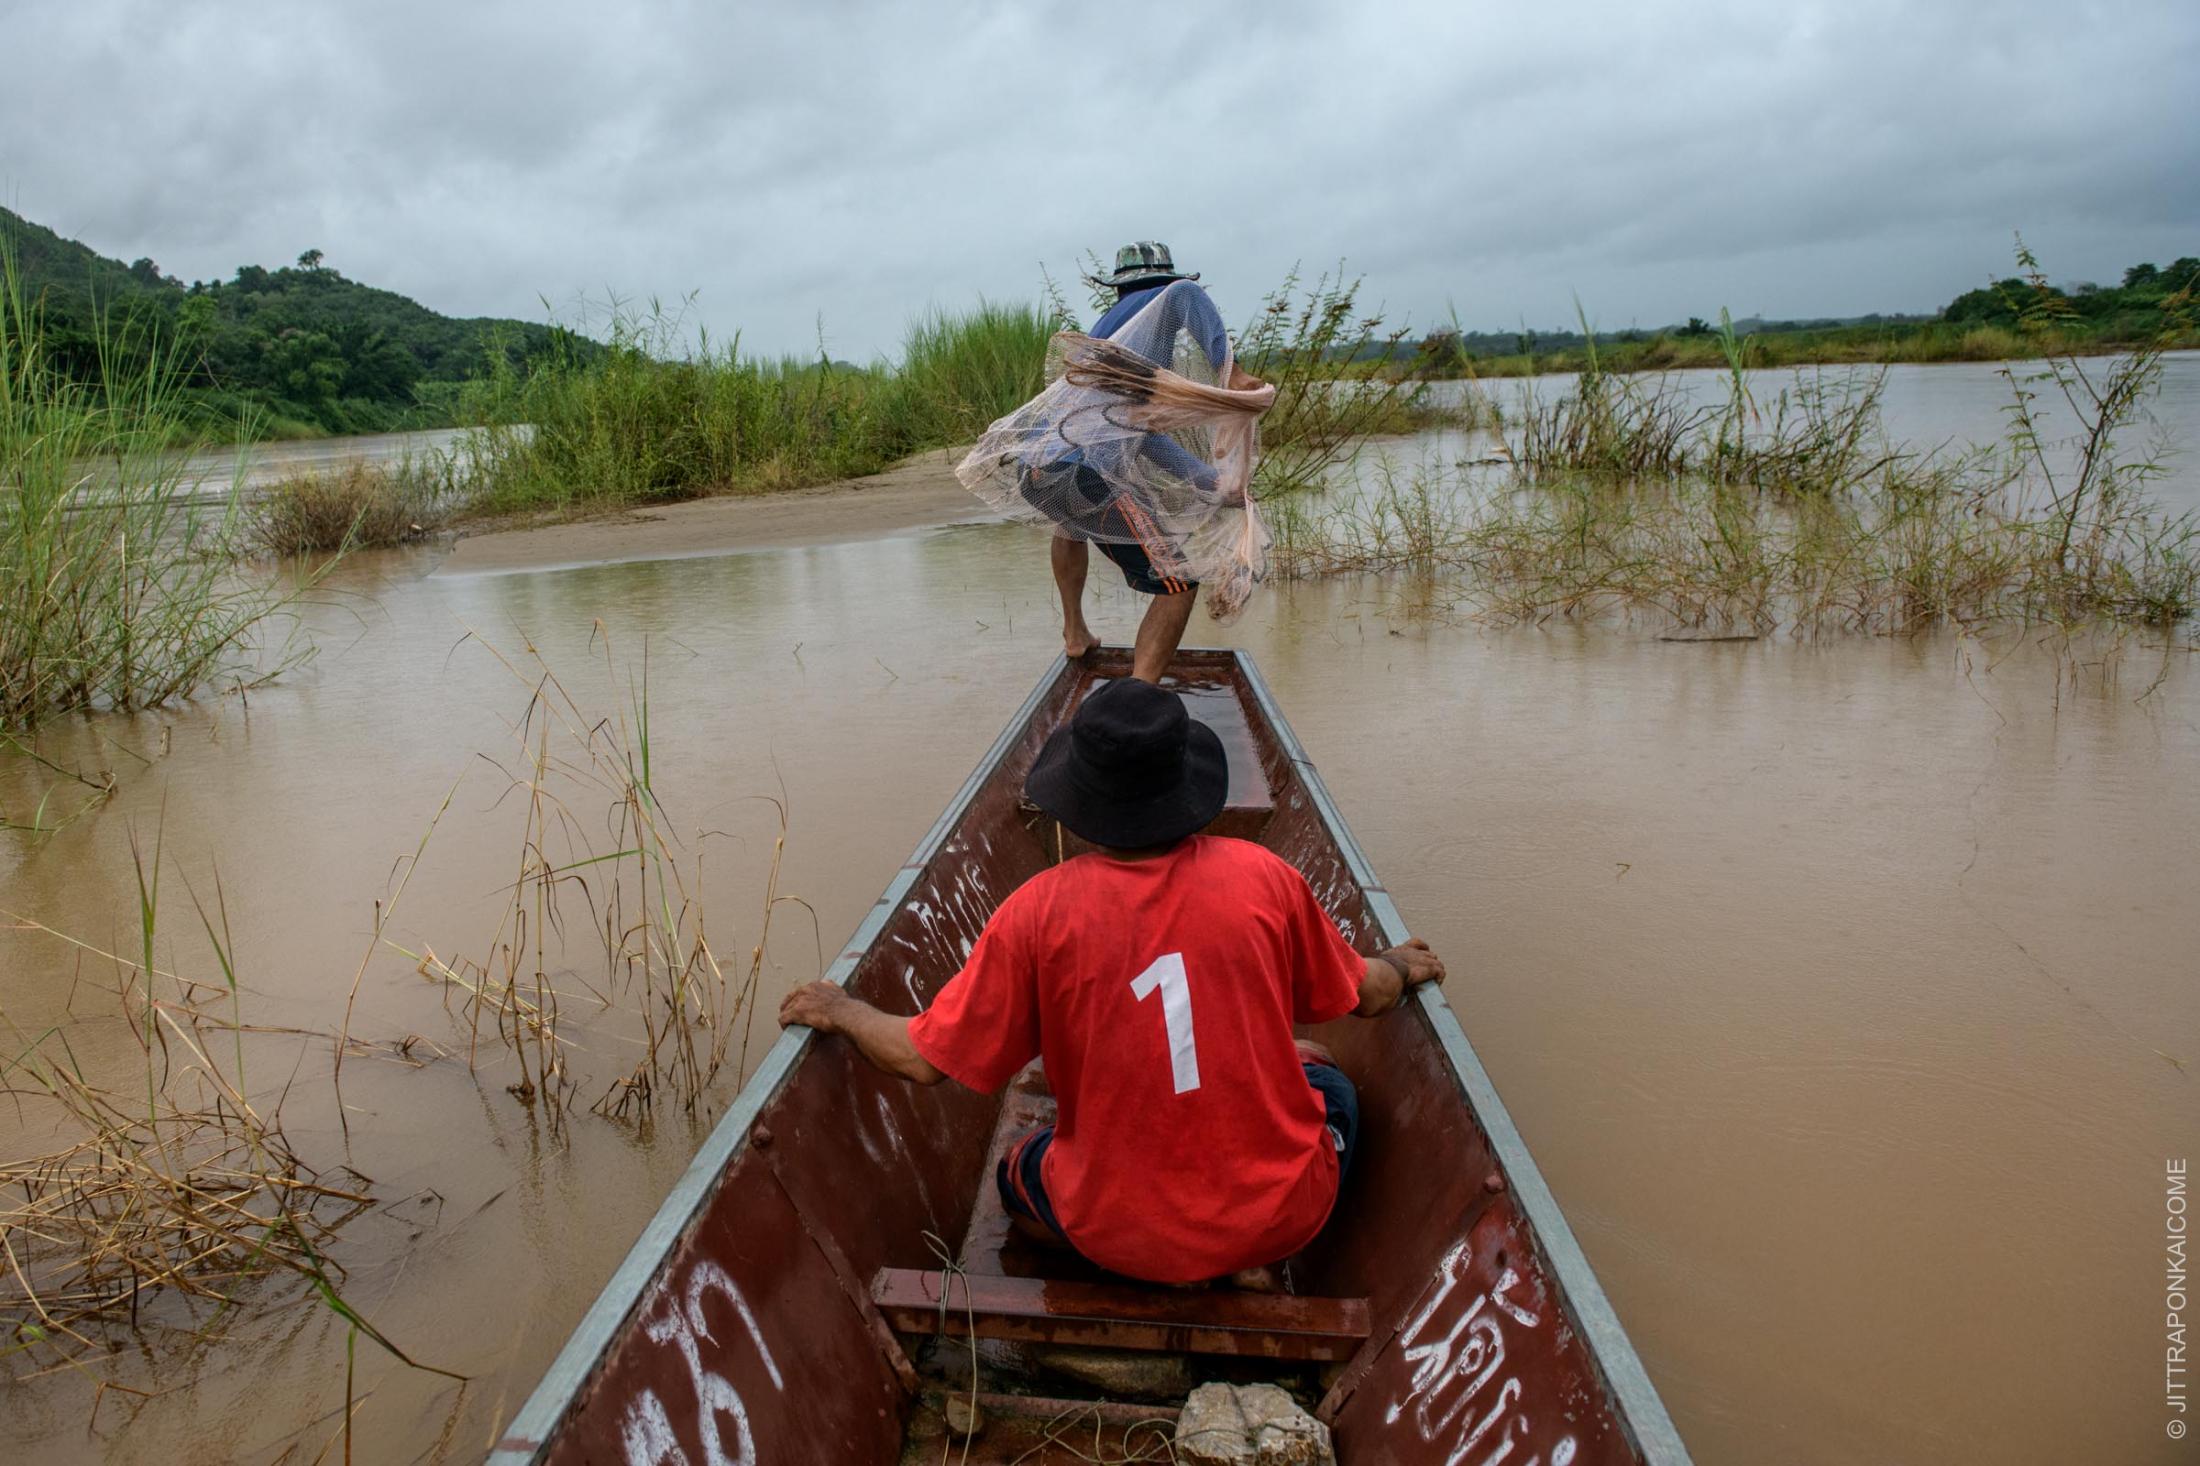 Fishermen are out fishing on the unusually low waters of the Mekong River. This is caused by upstream dams, resulting in fewer opportunities for a profitable catch. In Nong Khai, Thailand &ndash; August 2020.